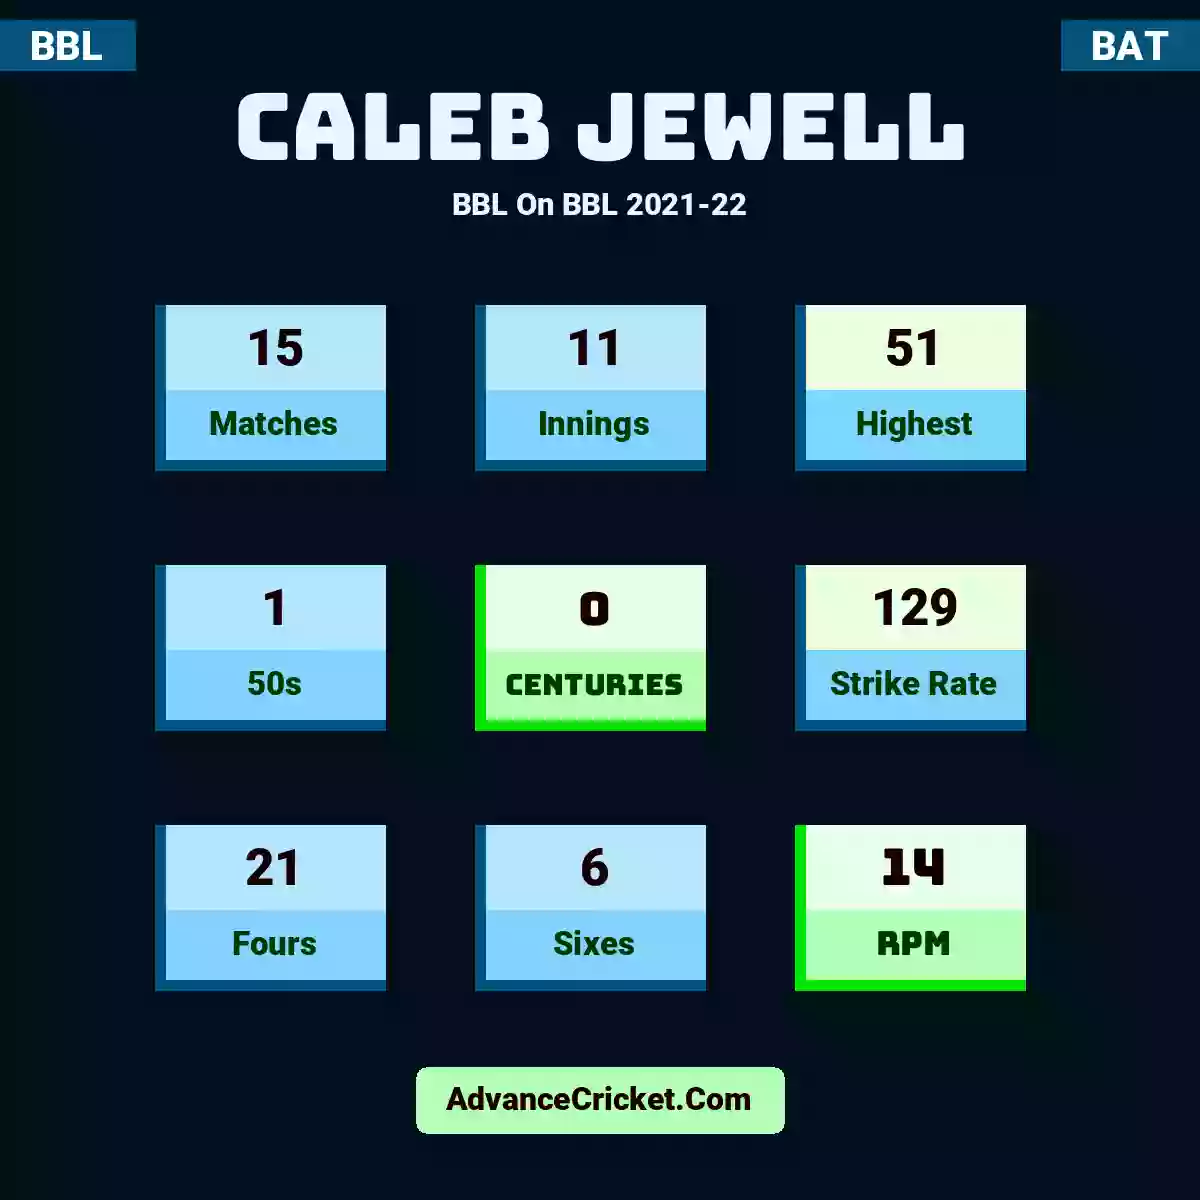 Caleb Jewell BBL  On BBL 2021-22, Caleb Jewell played 15 matches, scored 51 runs as highest, 1 half-centuries, and 0 centuries, with a strike rate of 129. C.Jewell hit 21 fours and 6 sixes, with an RPM of 14.